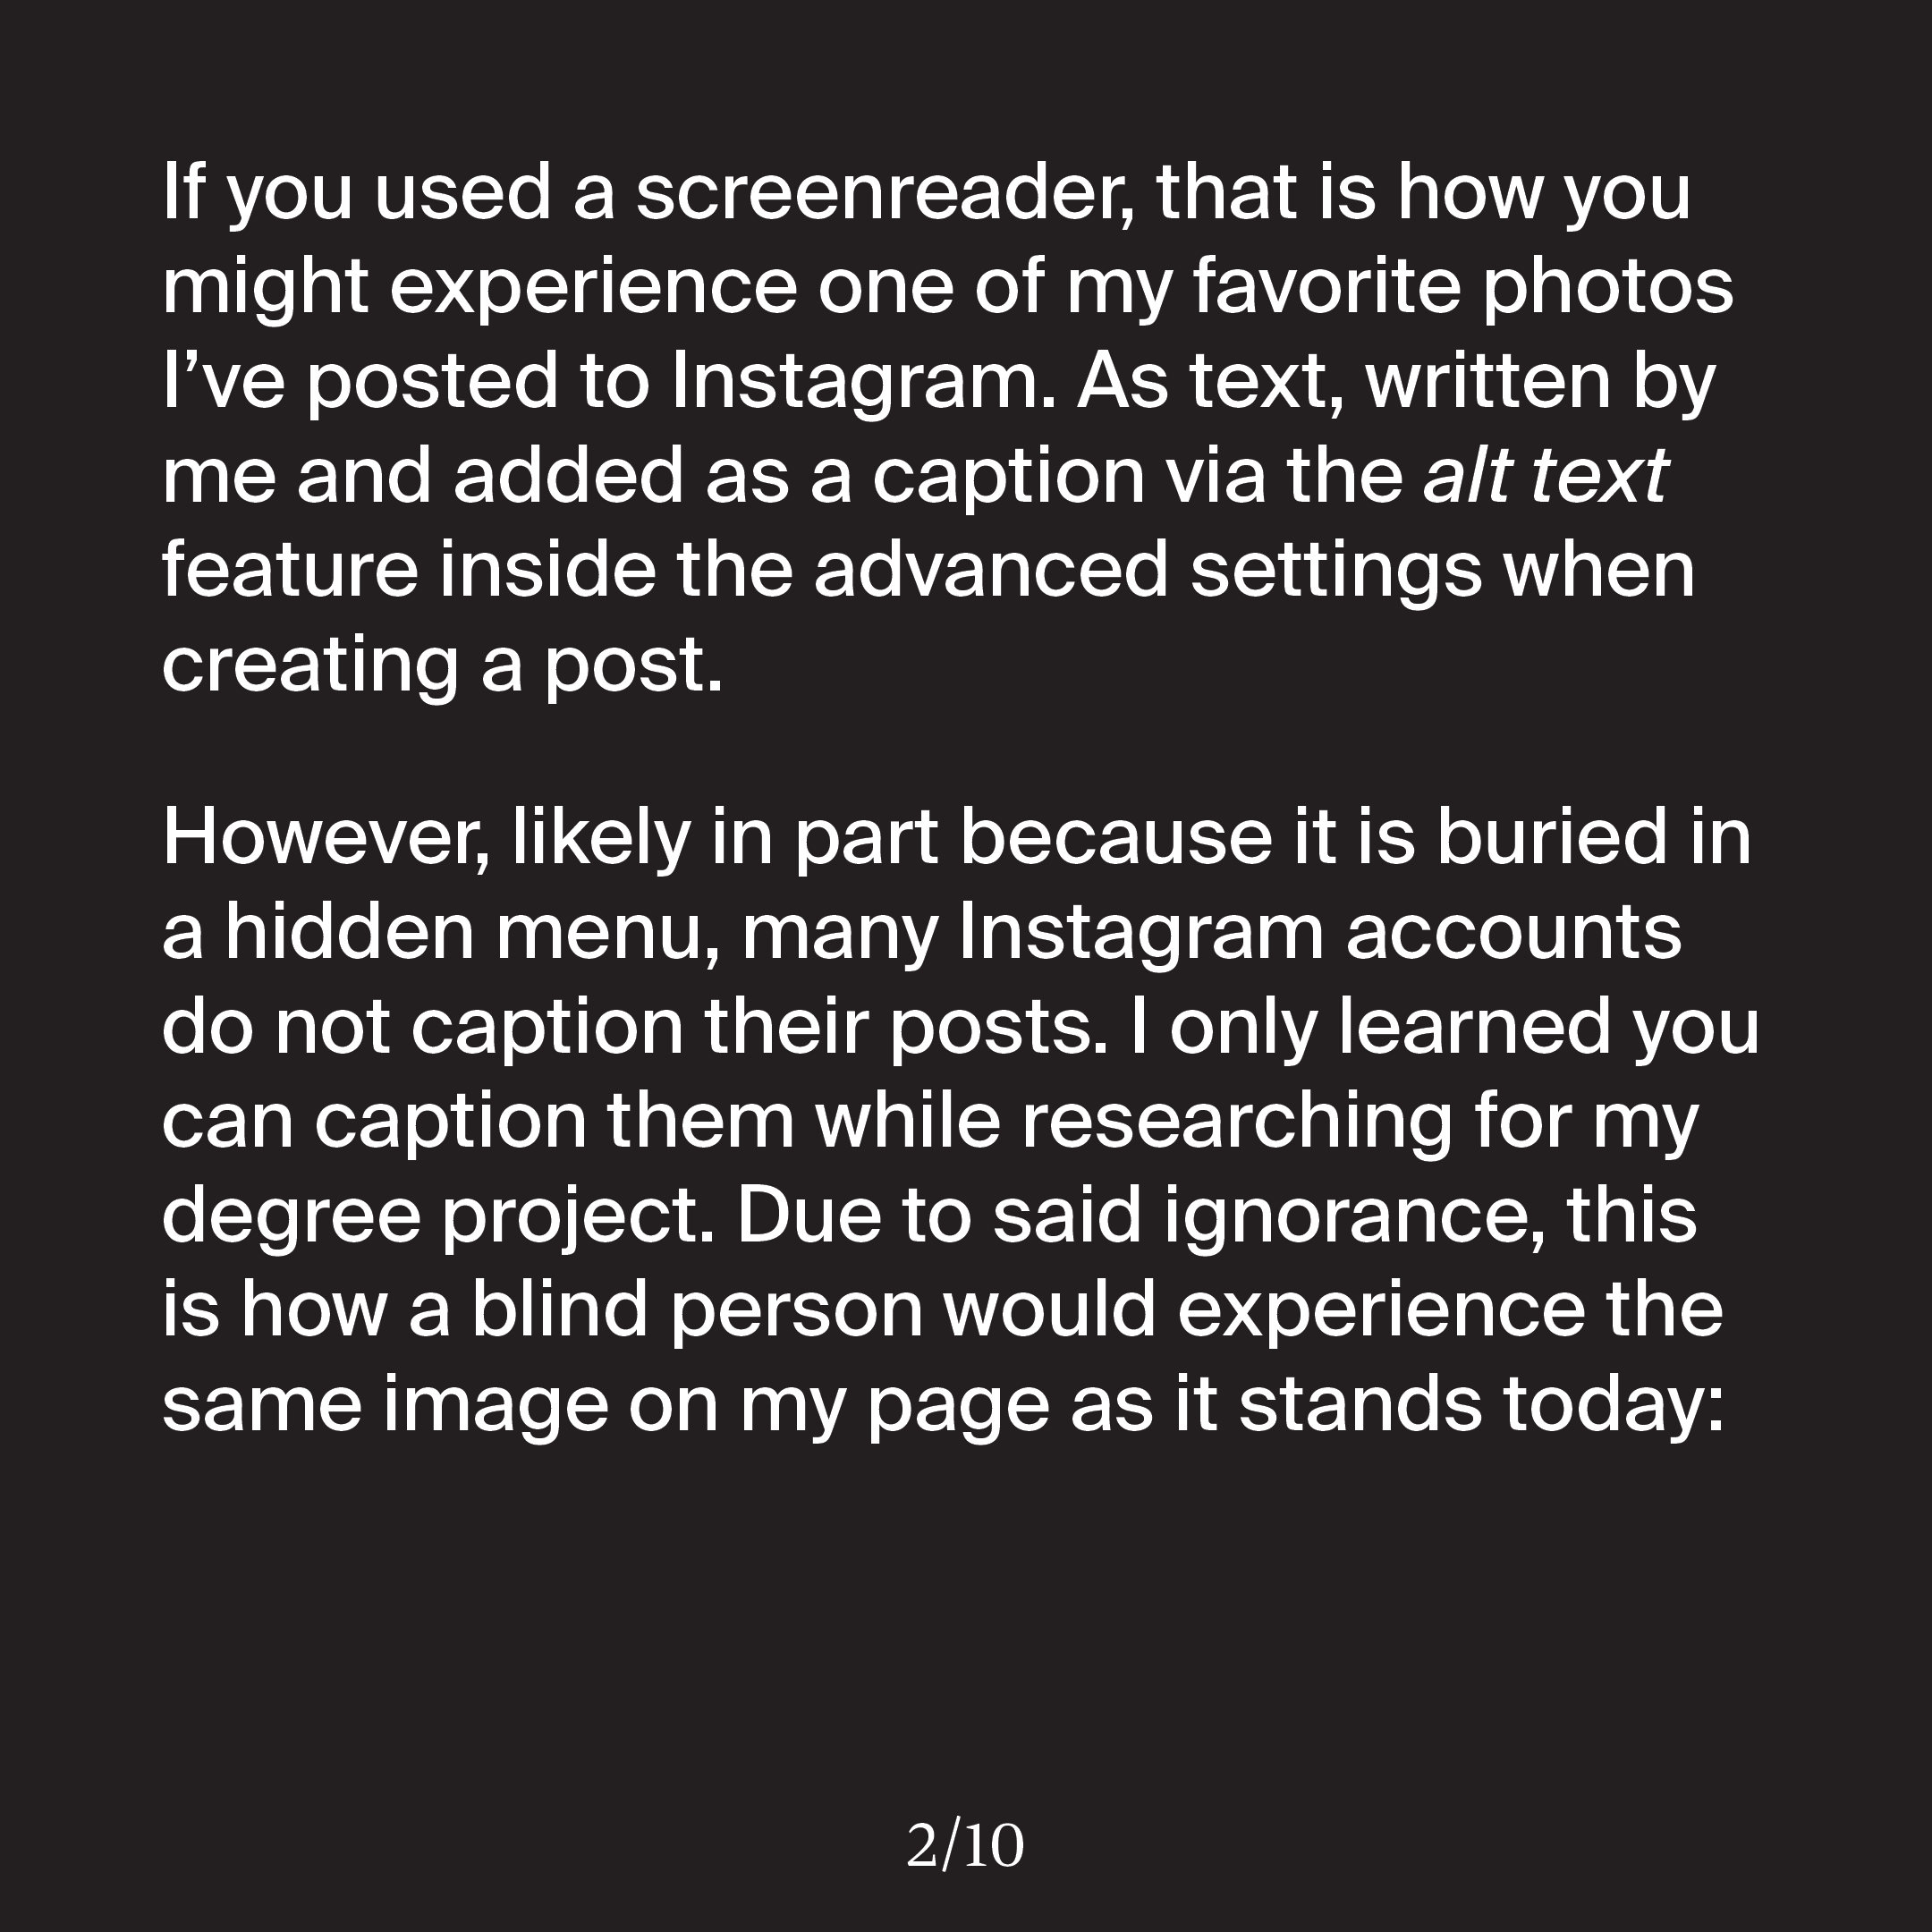 'If you used a screenreader, that is how you might experience one of my favorite photos I’ve posted to Instagram. As text, written by me and added as a caption via the alt text feature inside the advanced settings when creating a post. However, likely in part because it is buried in a hidden menu, many Instagram accounts do not caption their posts. I only learned you can caption them while researching for my degree project. Due to said ignorance, this is how a blind person would experience the same image on my page as it stands today:'